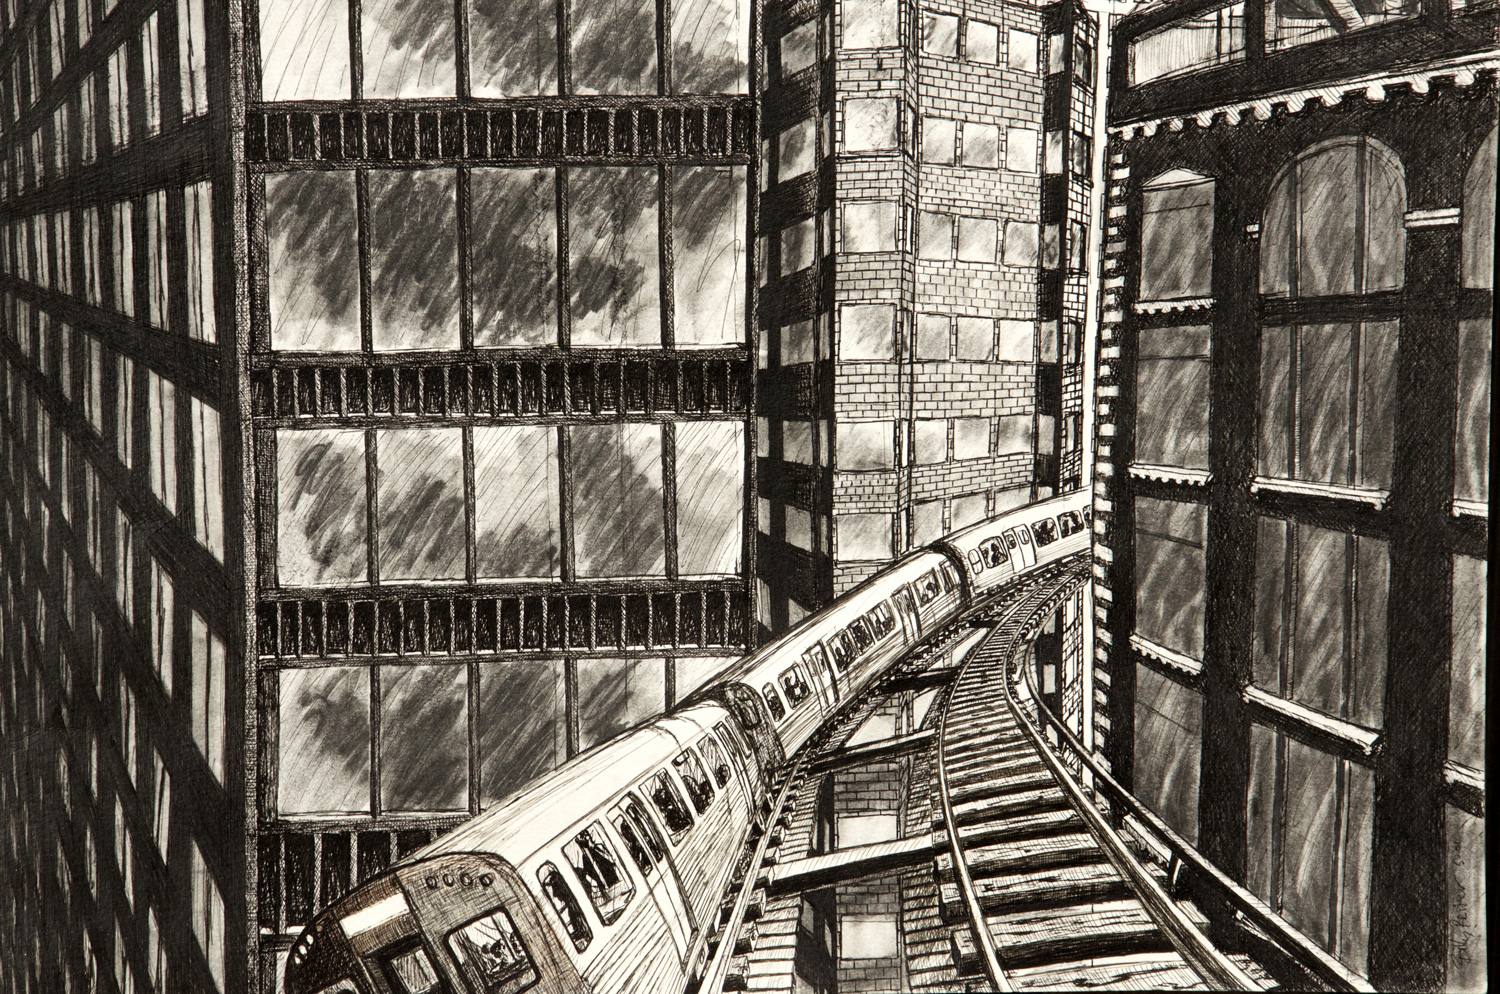 The Turbulent City drawing (Chicago imaginary cityscape), by Billy Reiter